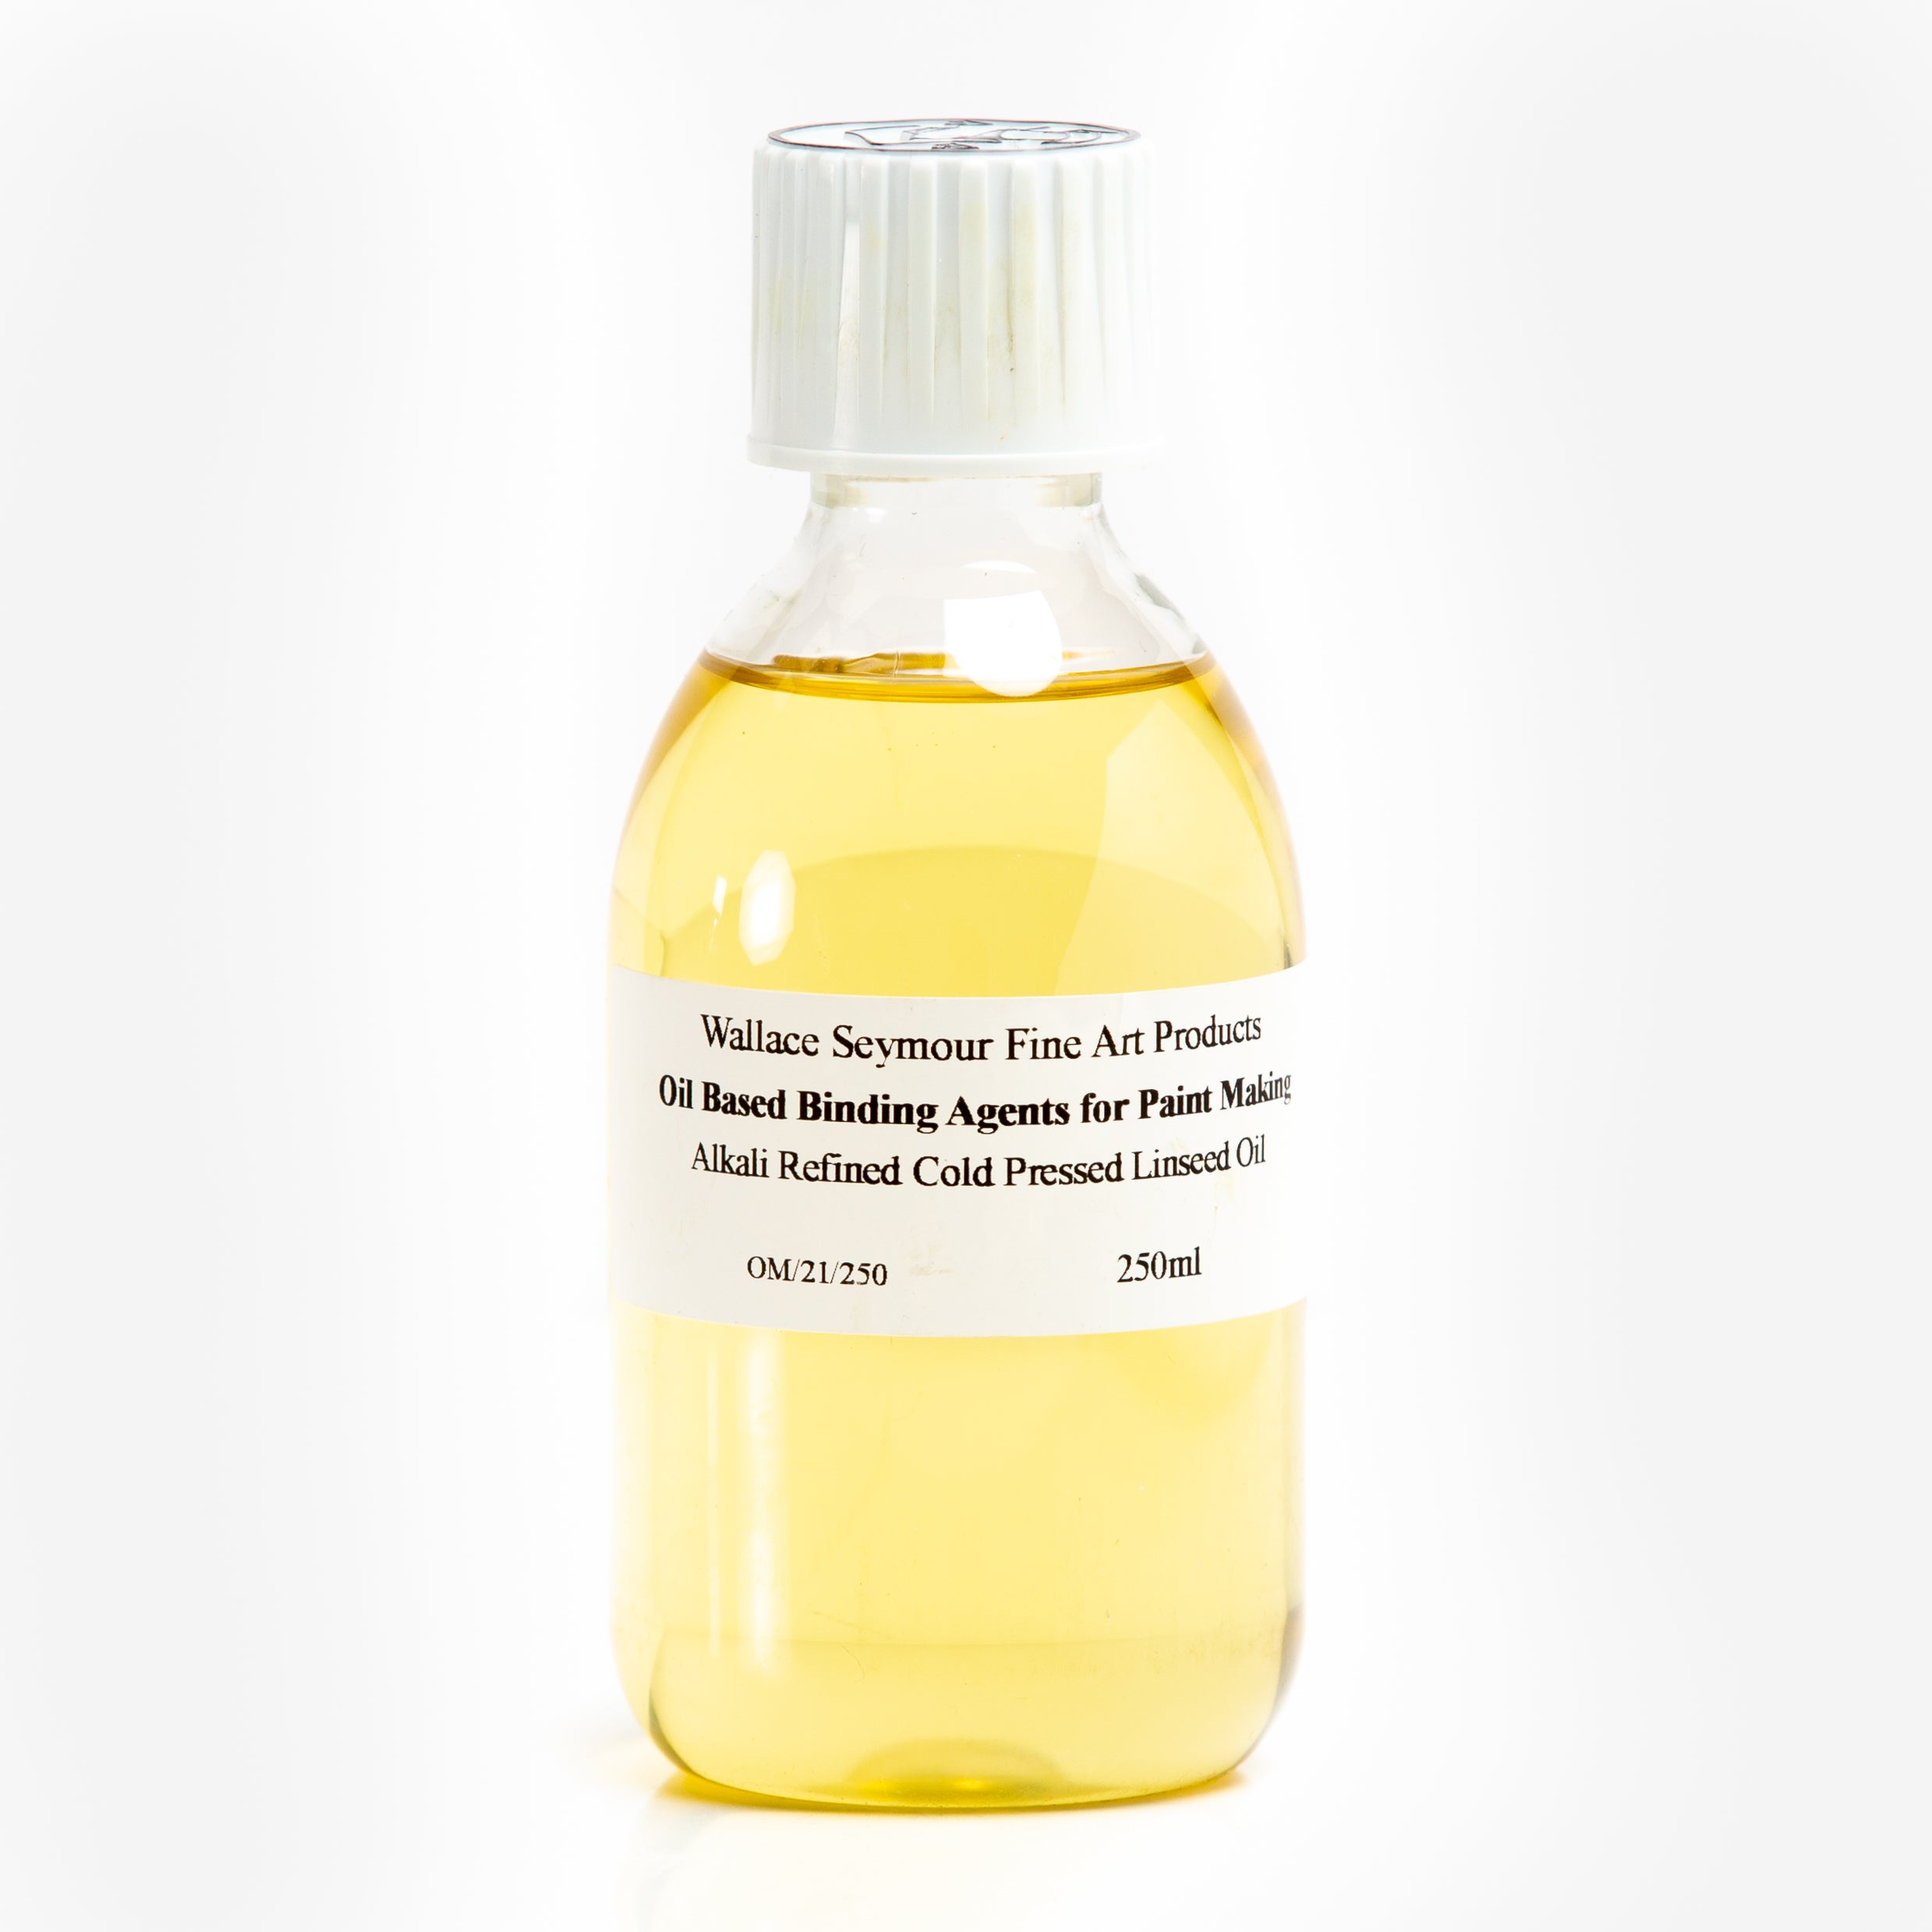 Wallace Seymour Alkali Refined Cold Pressed Linseed Oil